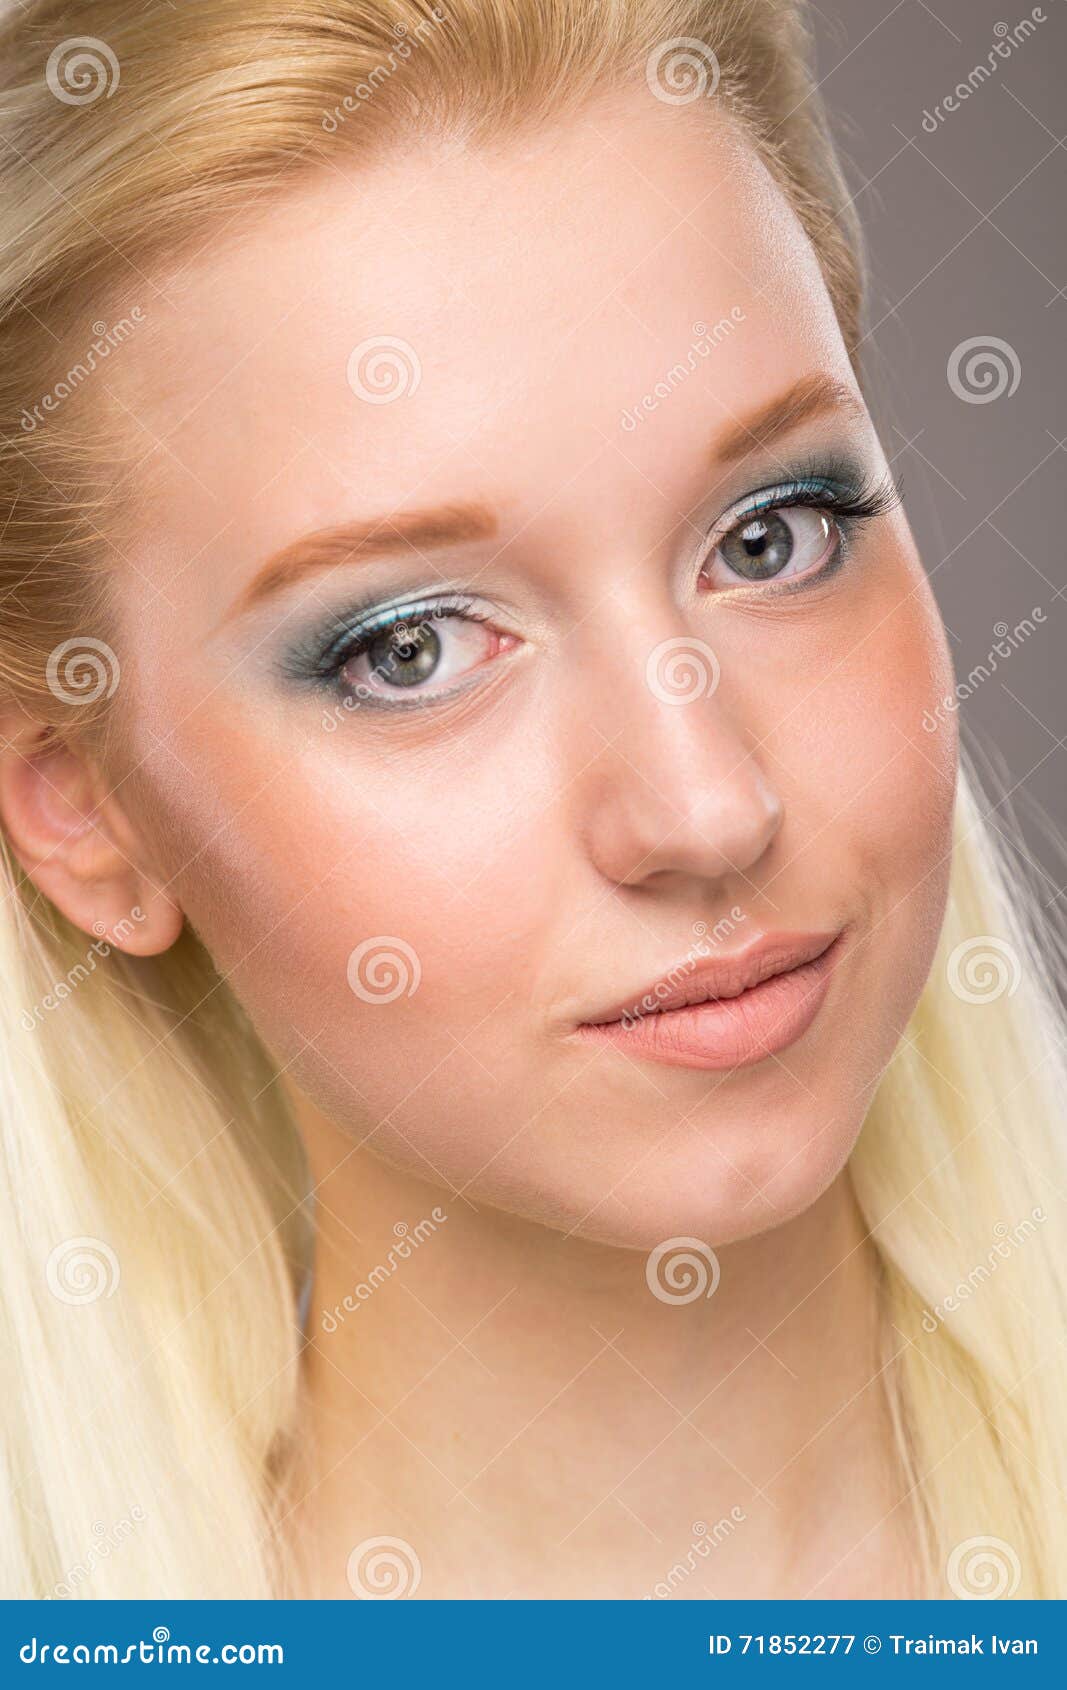 Girl With Make Up On Her Face Stock Image Image Of Model Beauty